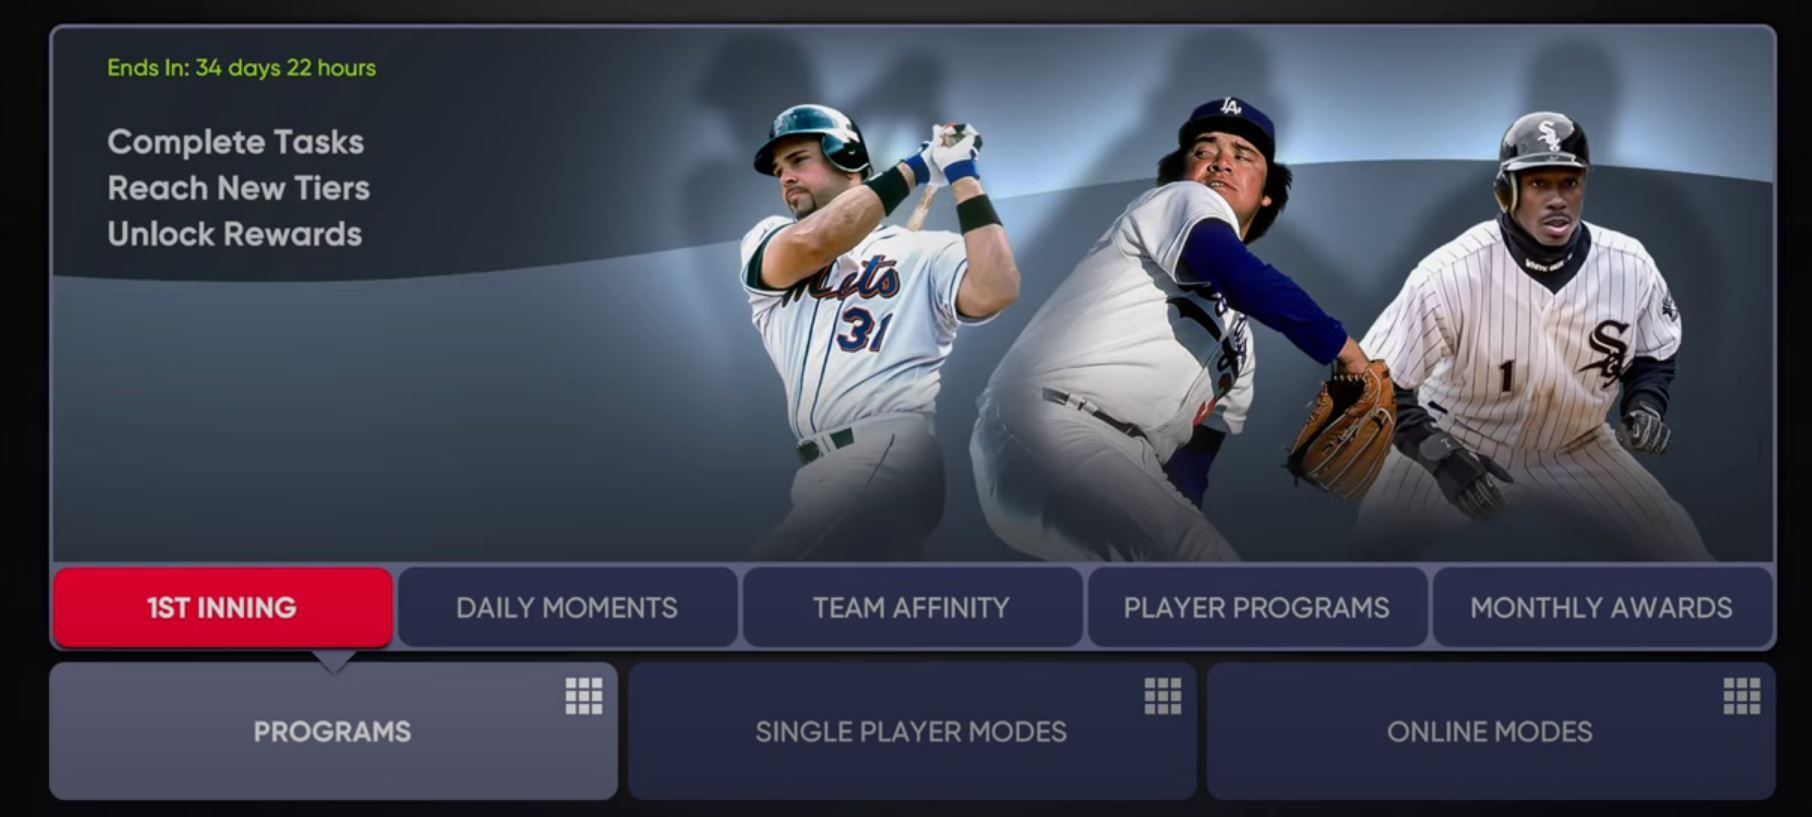 10 New Features In MLB The Show 23 Diamond Dynasty